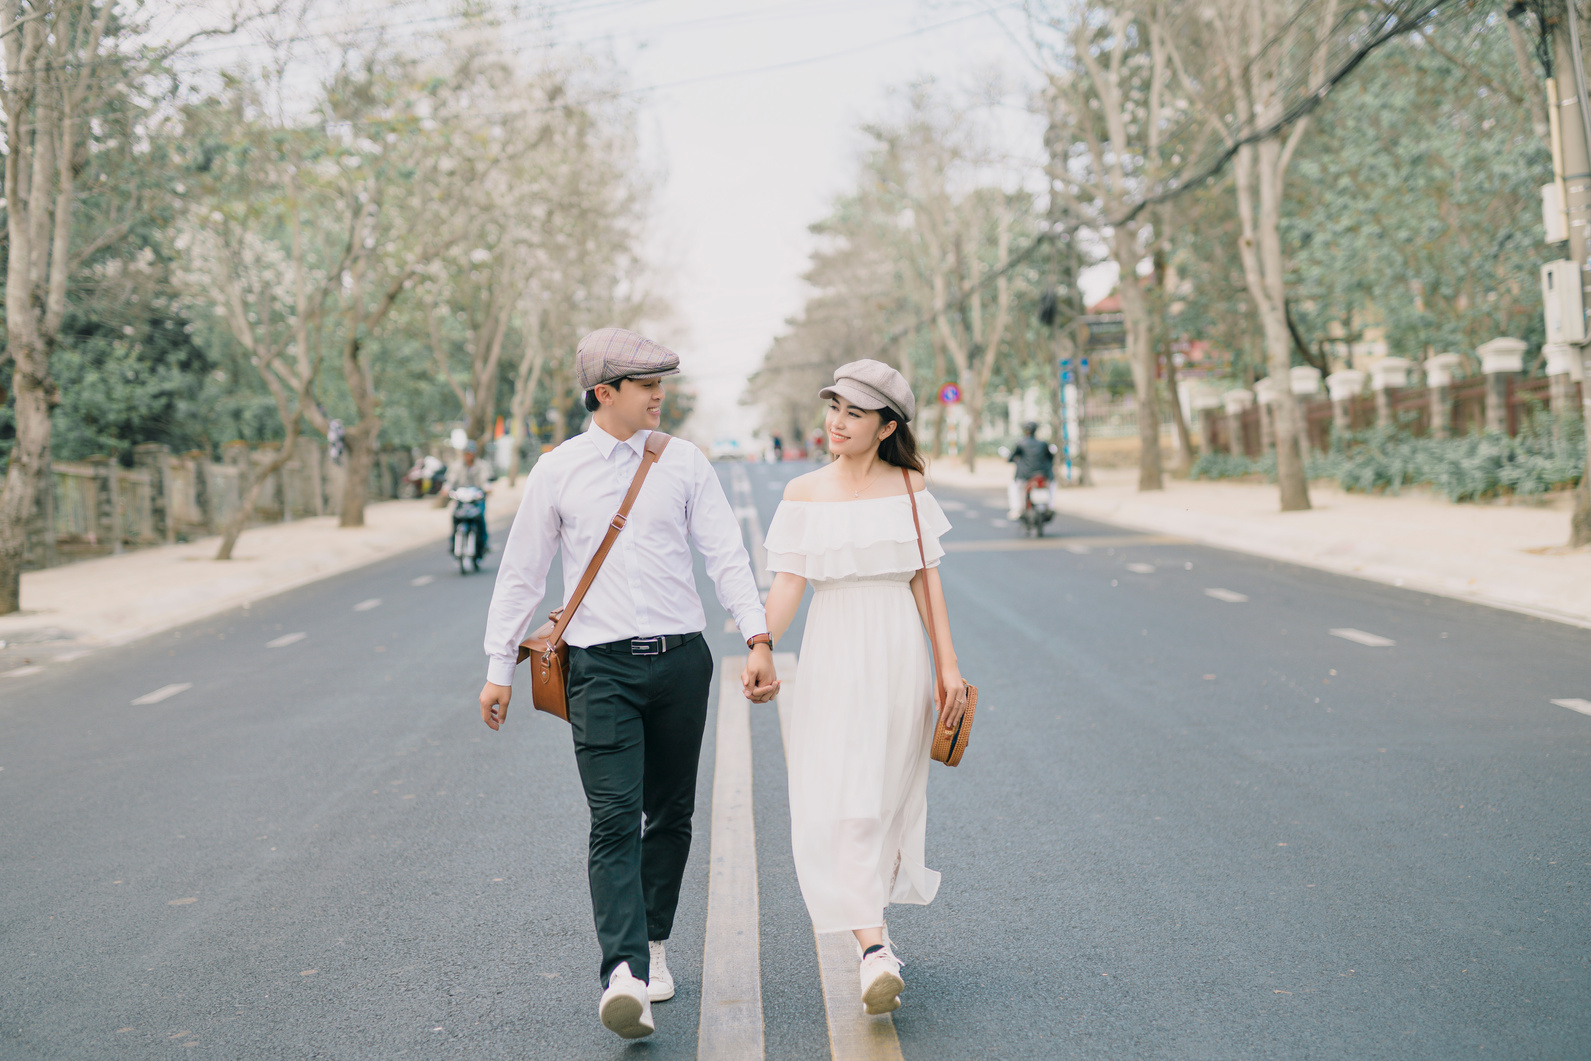 A Couple Holding Hands While Walking on a Street